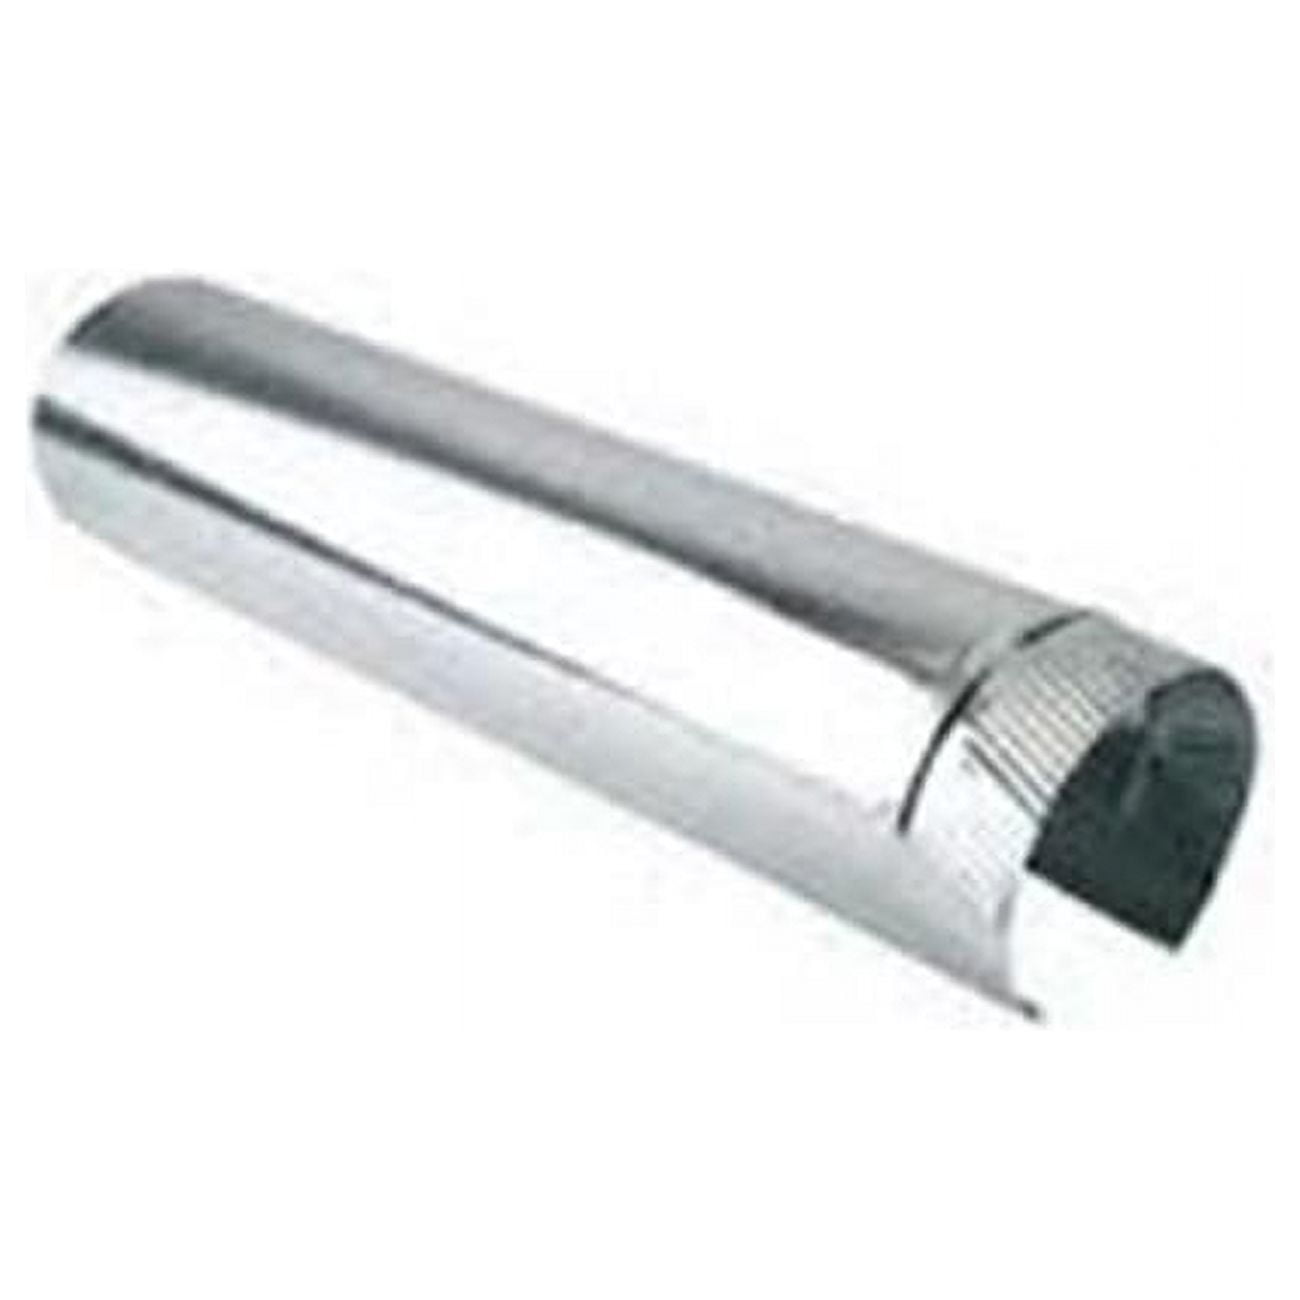 3602970 6 X 24 In. Galvanized Connector Pipe - 26 Gauge